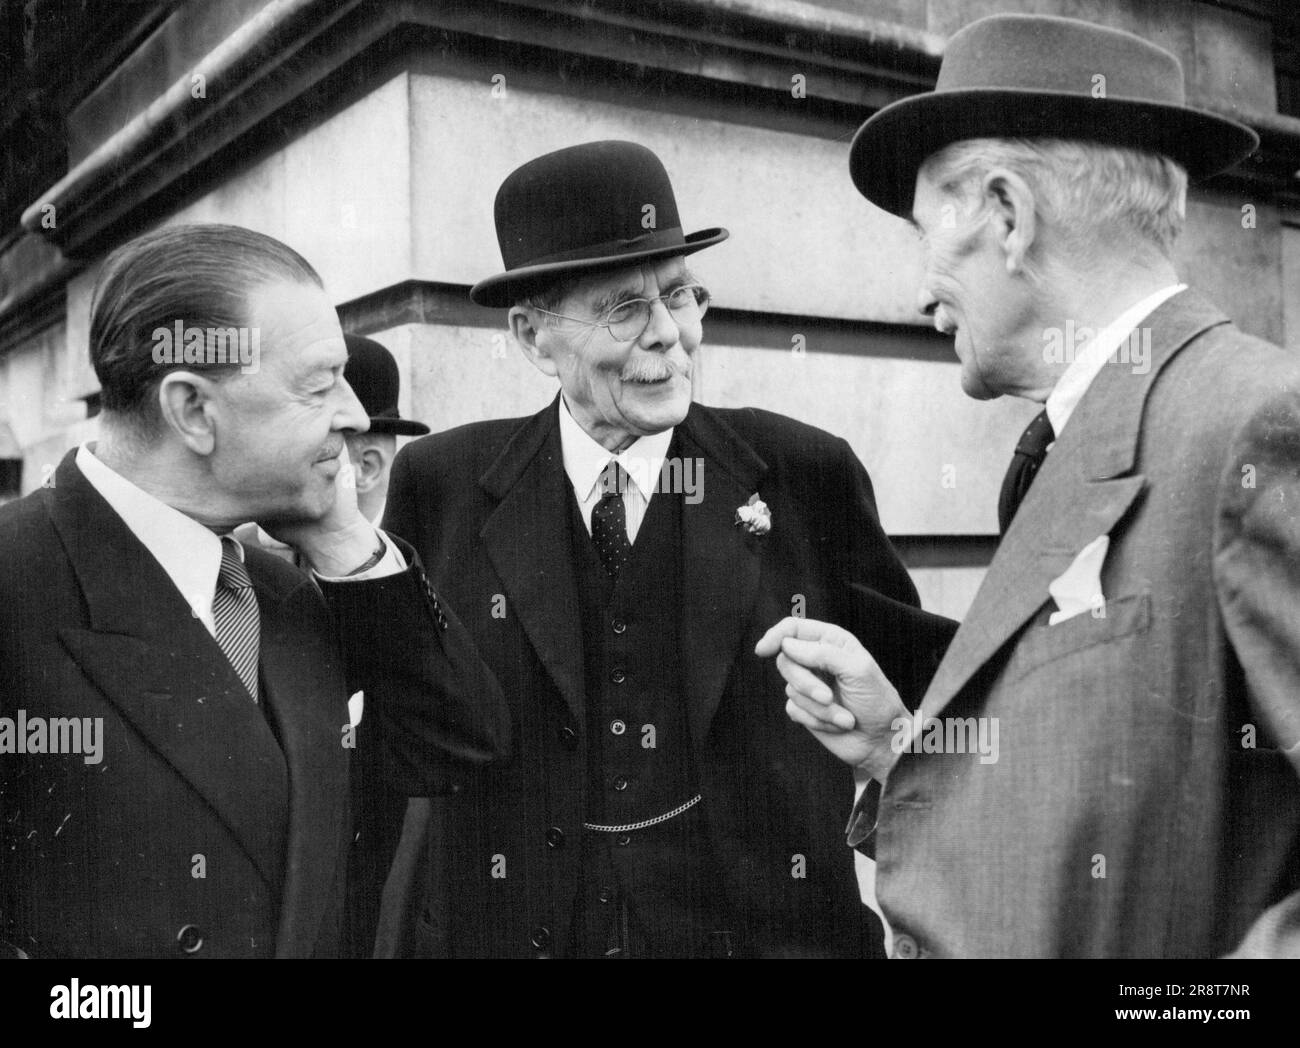 Watch ING The Battle Of Britain Fly-Past -- (left to right) Earl Alexander, Marshal Of The Royal AIF Force Lord Trenchard, and Marshal Of The Royal Air Force Sir John Salmond, chat together on the roof of the Air Ministry King Charles Street before watching the 'Battle of Britain' Fly-past. September 15, 1953. Stock Photo